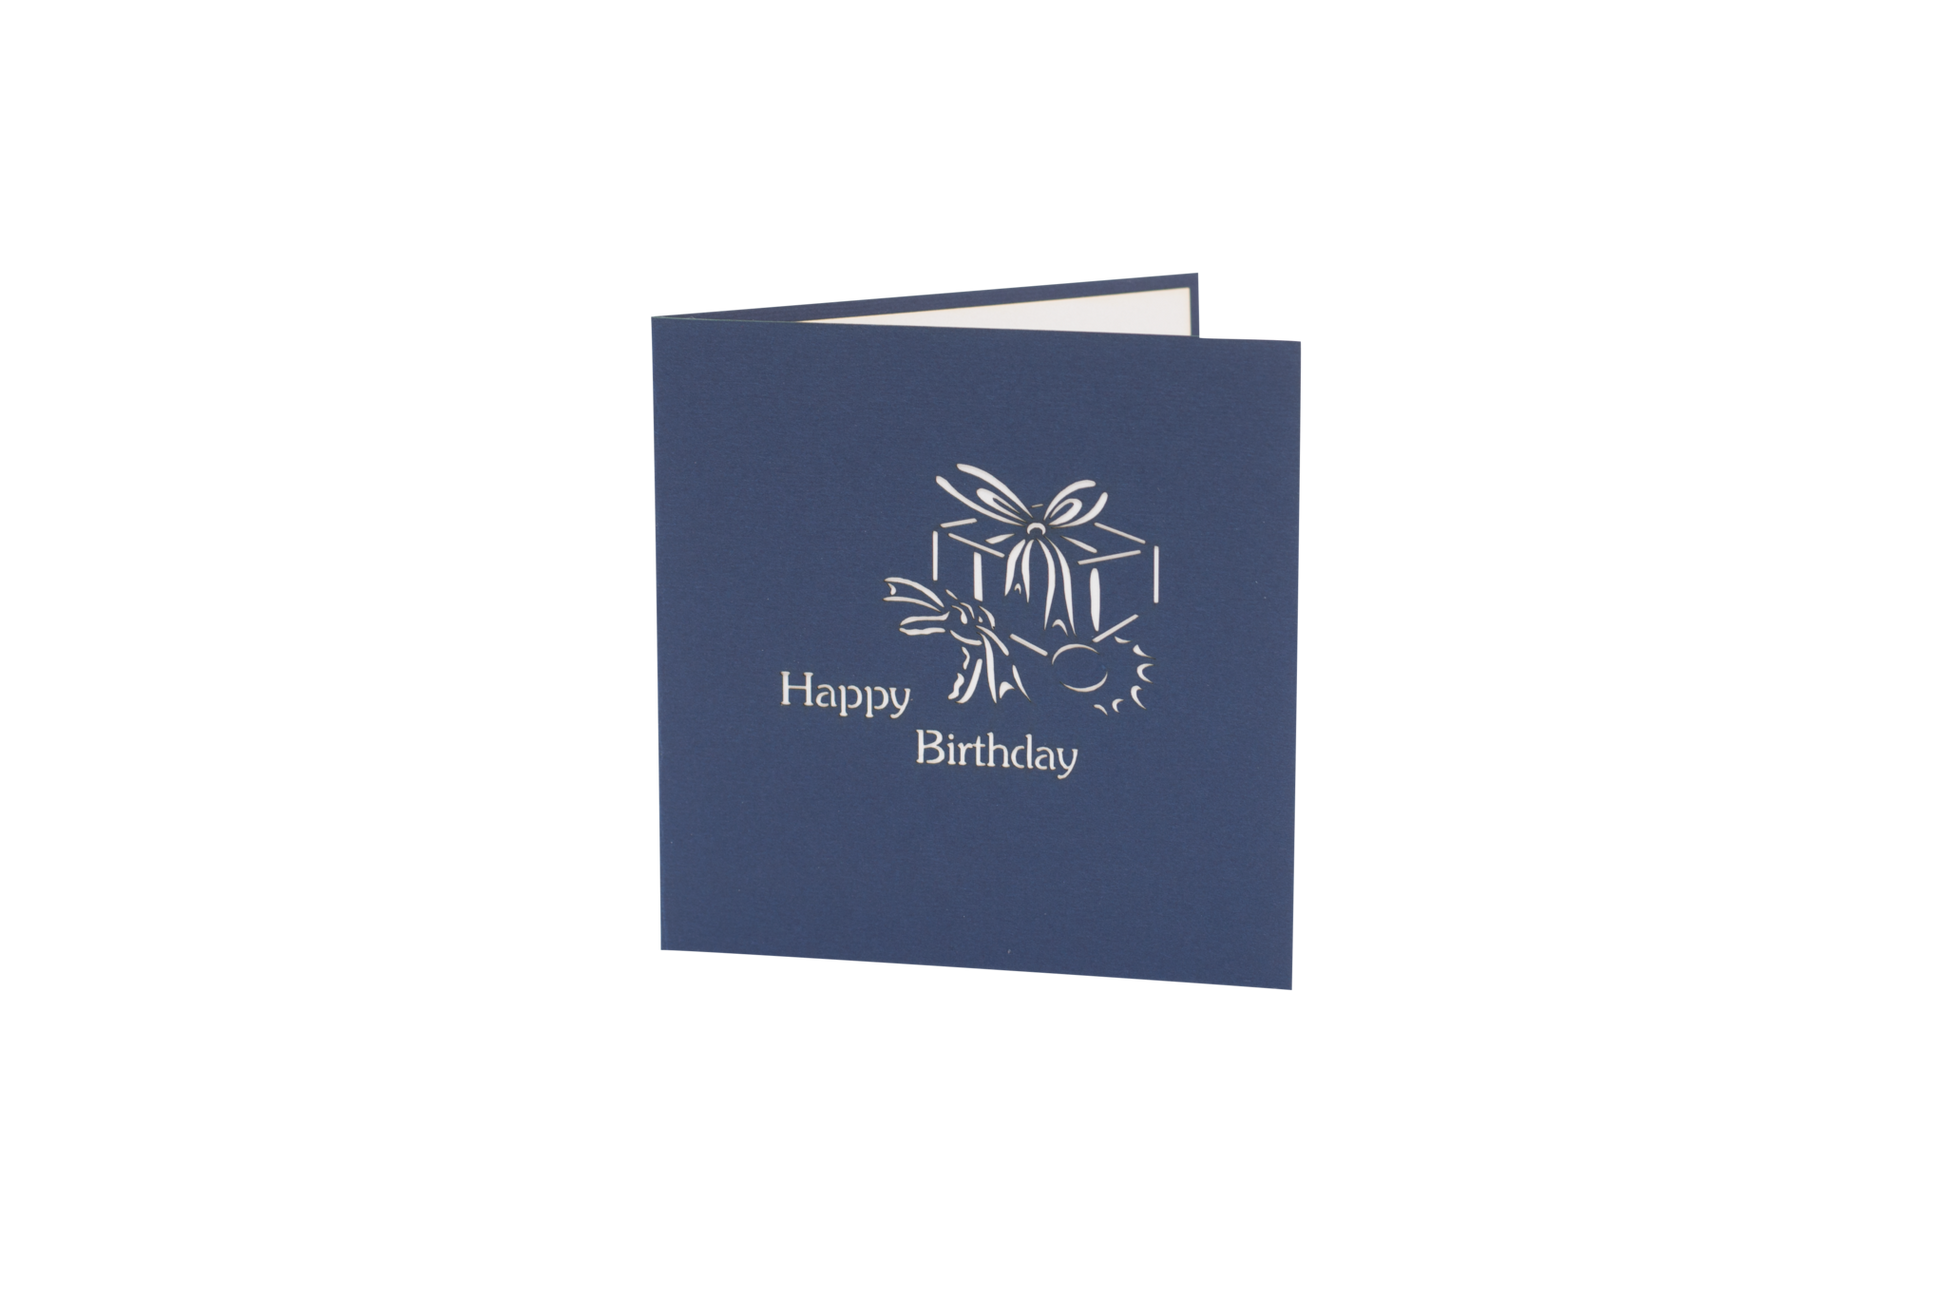 Dark blue card with outline of gift and the words "happy birthday" etched into the front cover in white